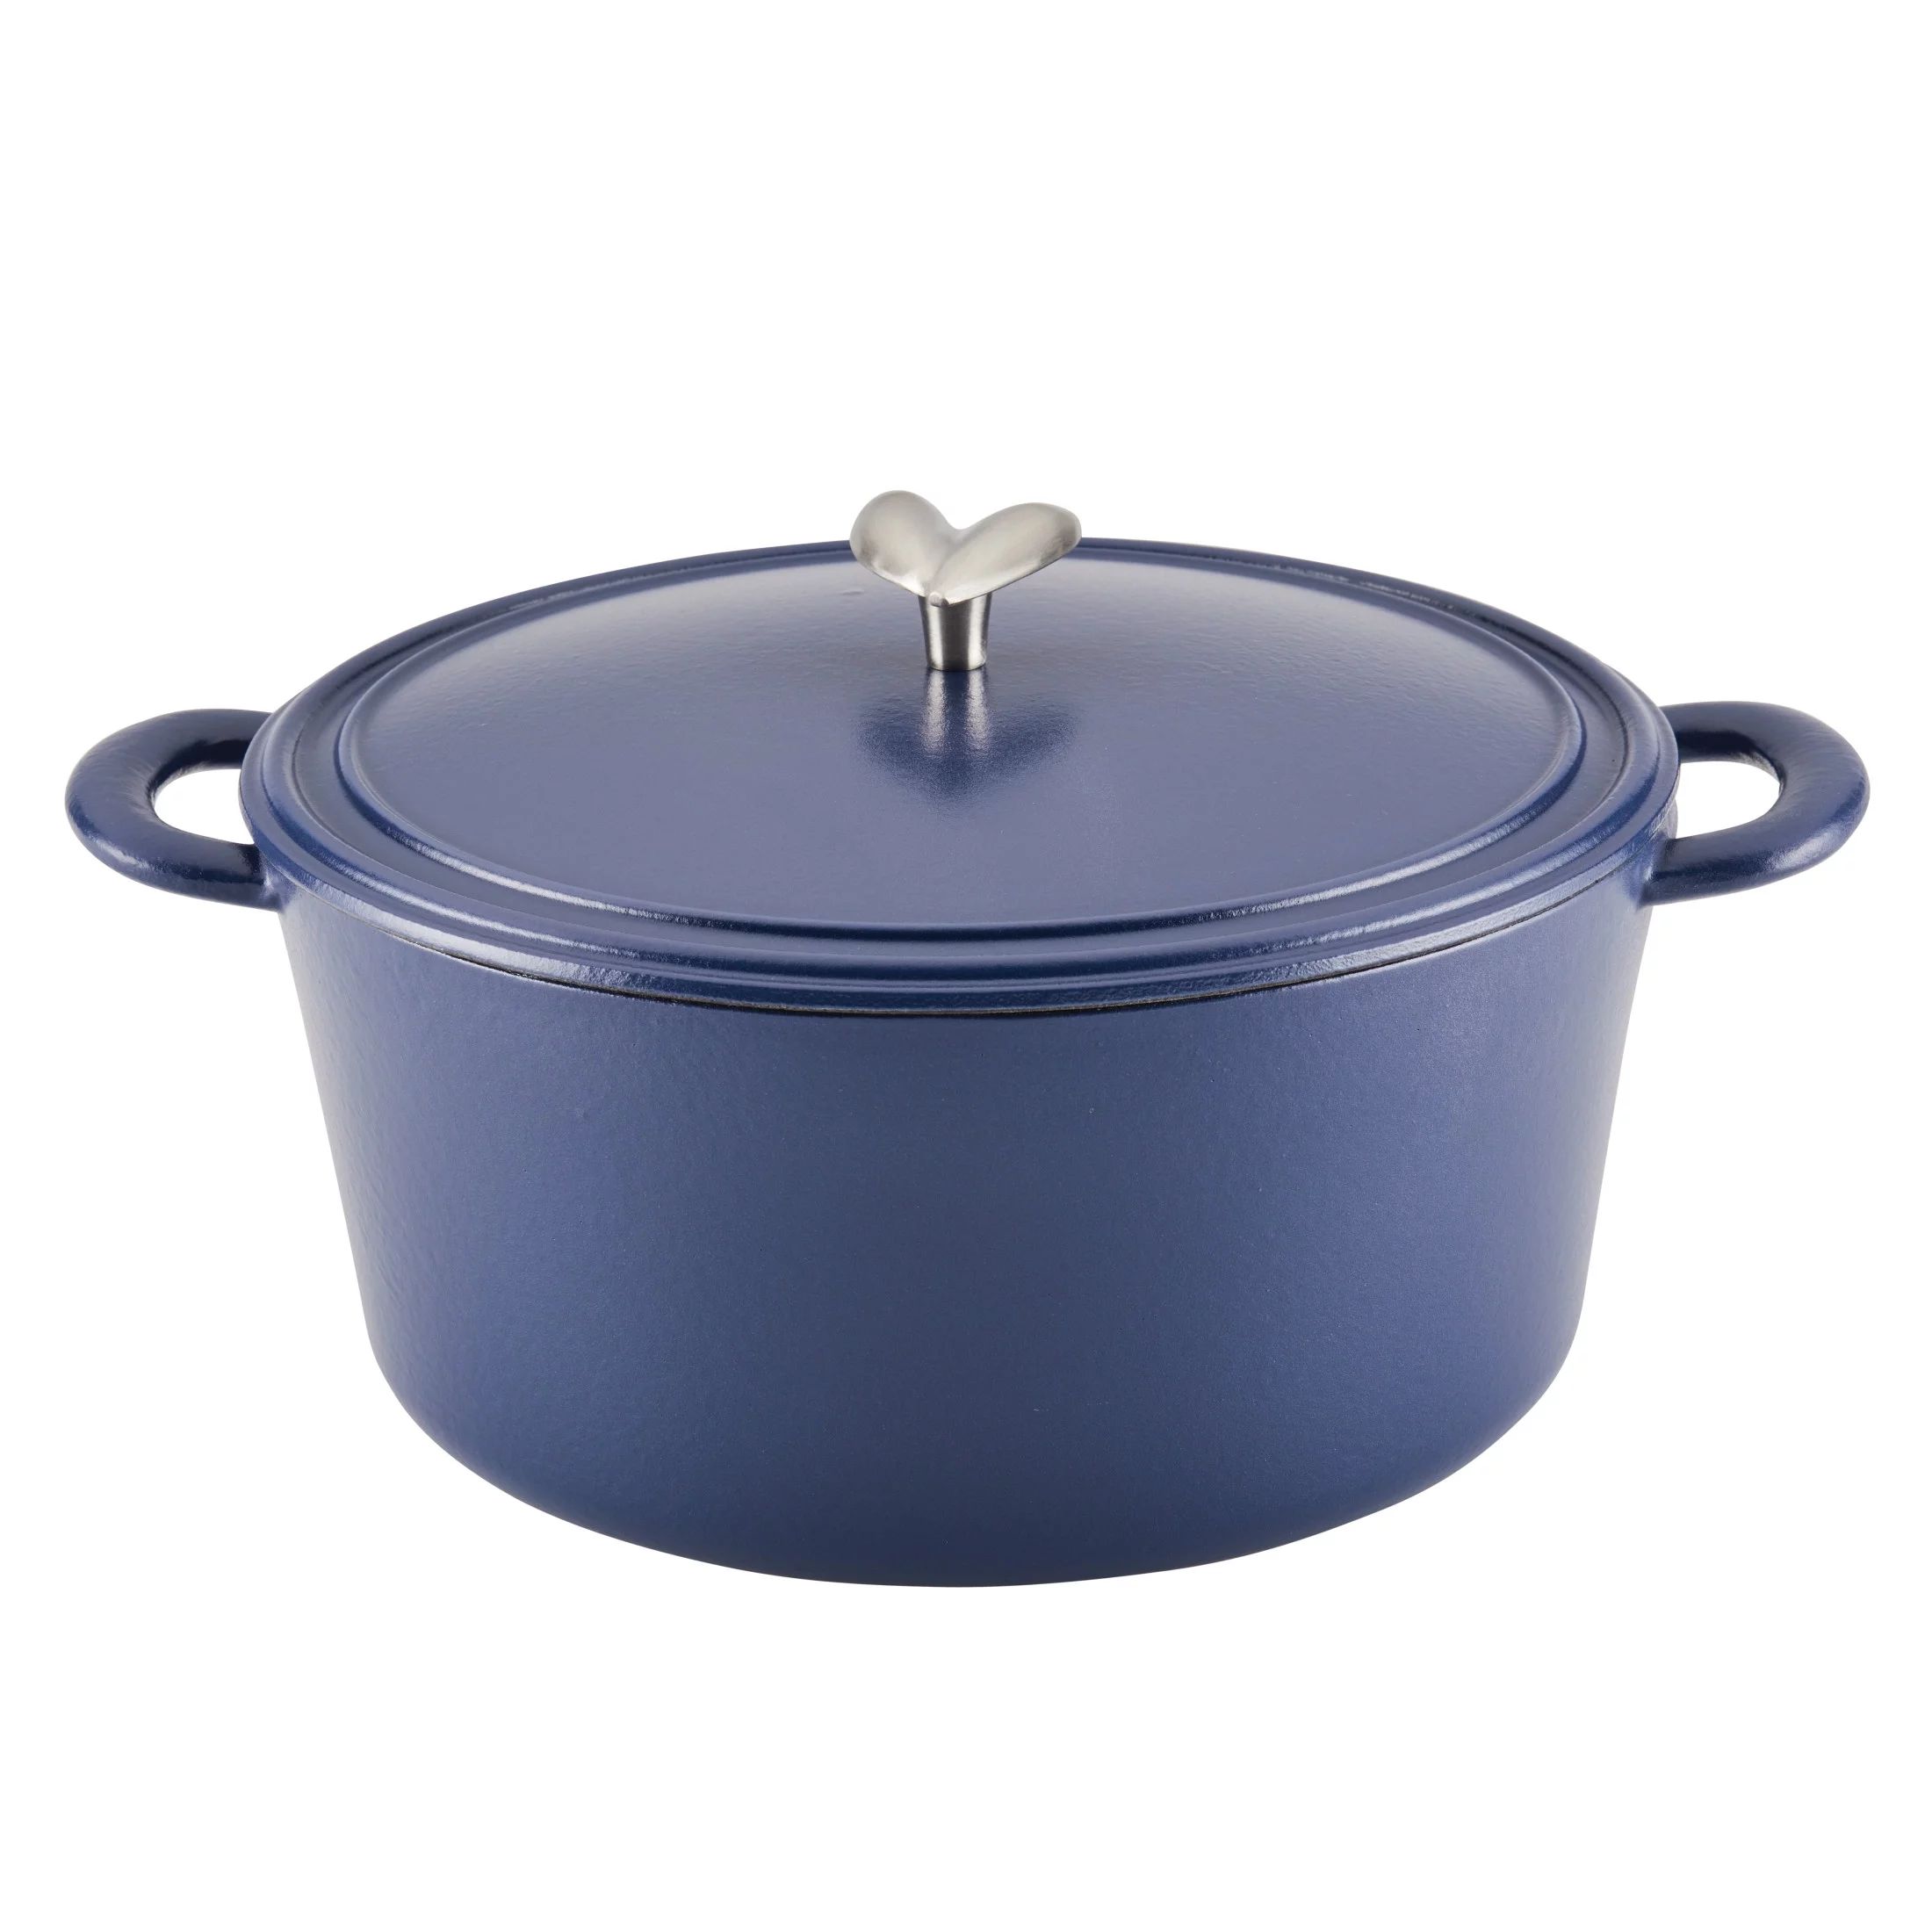 Ayesha Curry Enameled Cast Iron Dutch Oven with Lid, 6 Quart, Anchor Blue | Walmart (US)